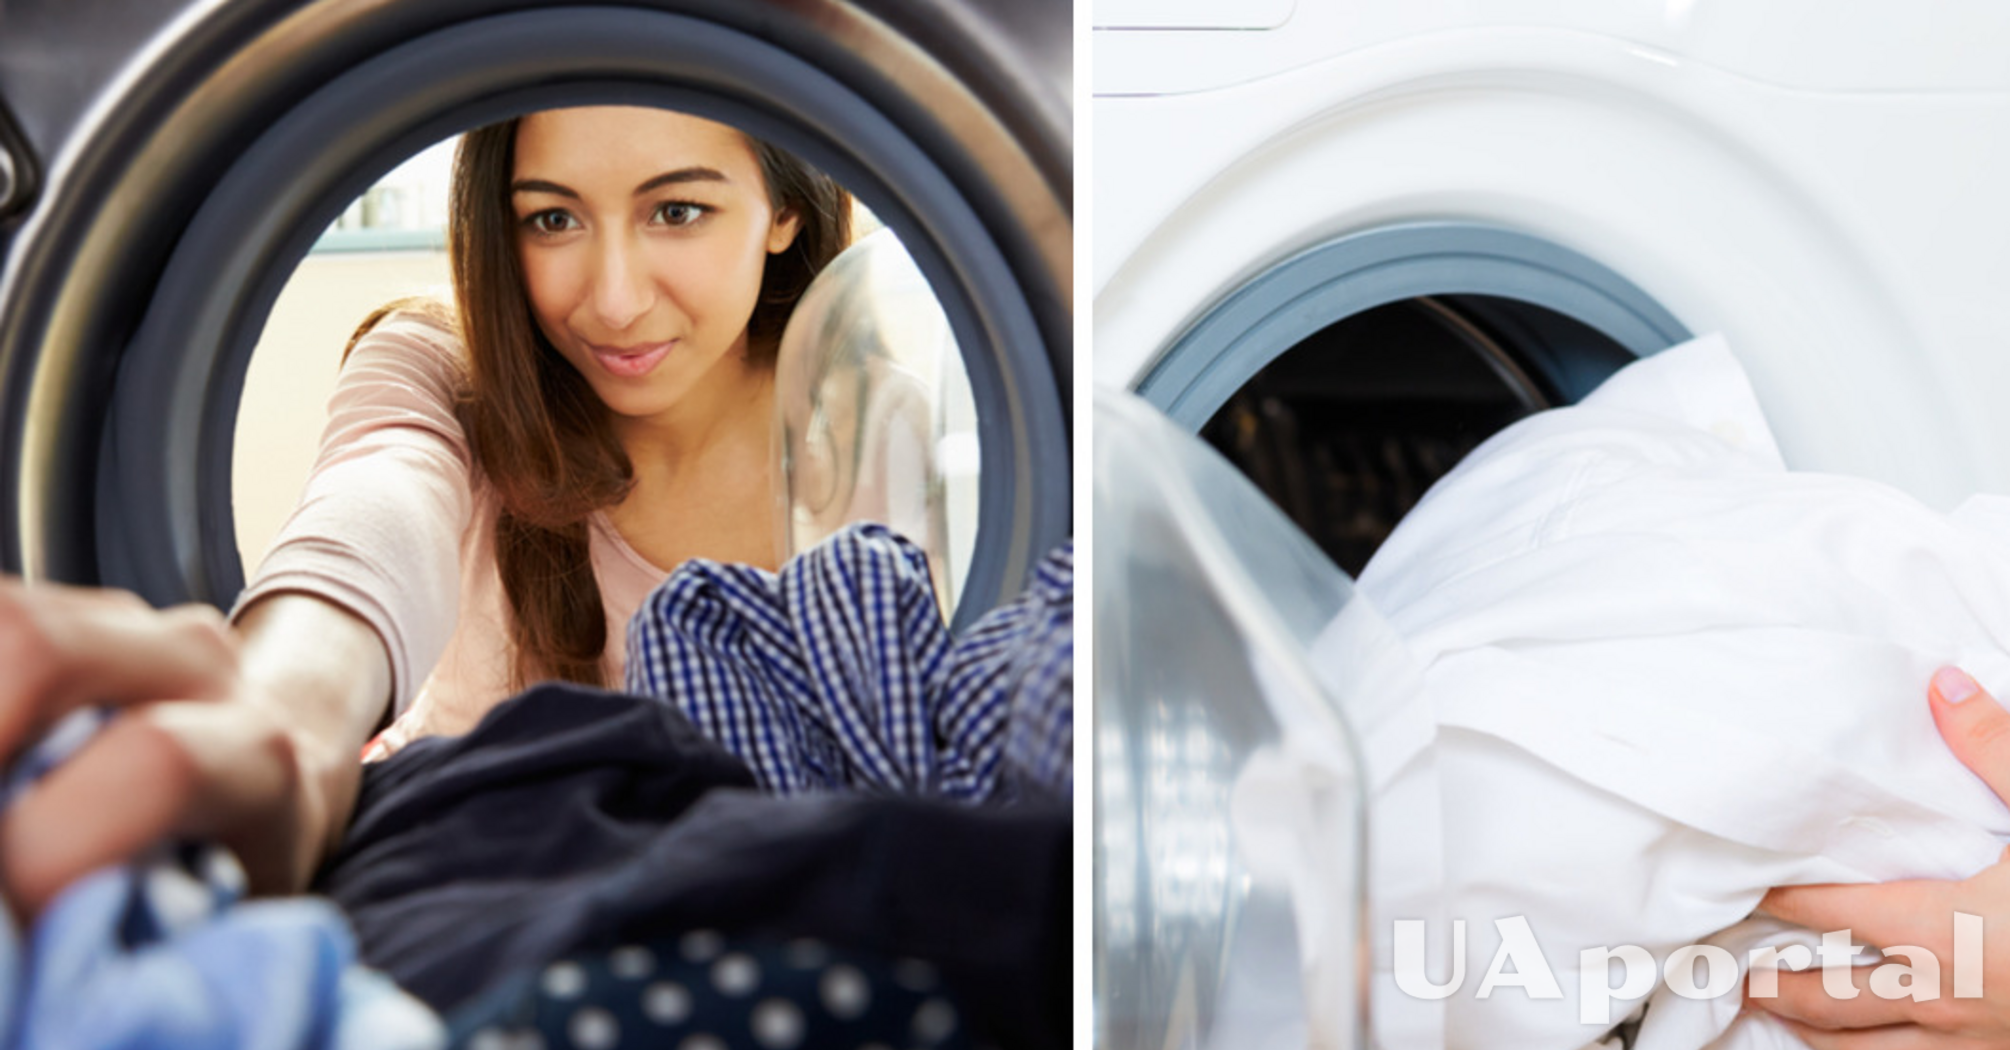 No need for a dryer: How to dry things in the washing machine